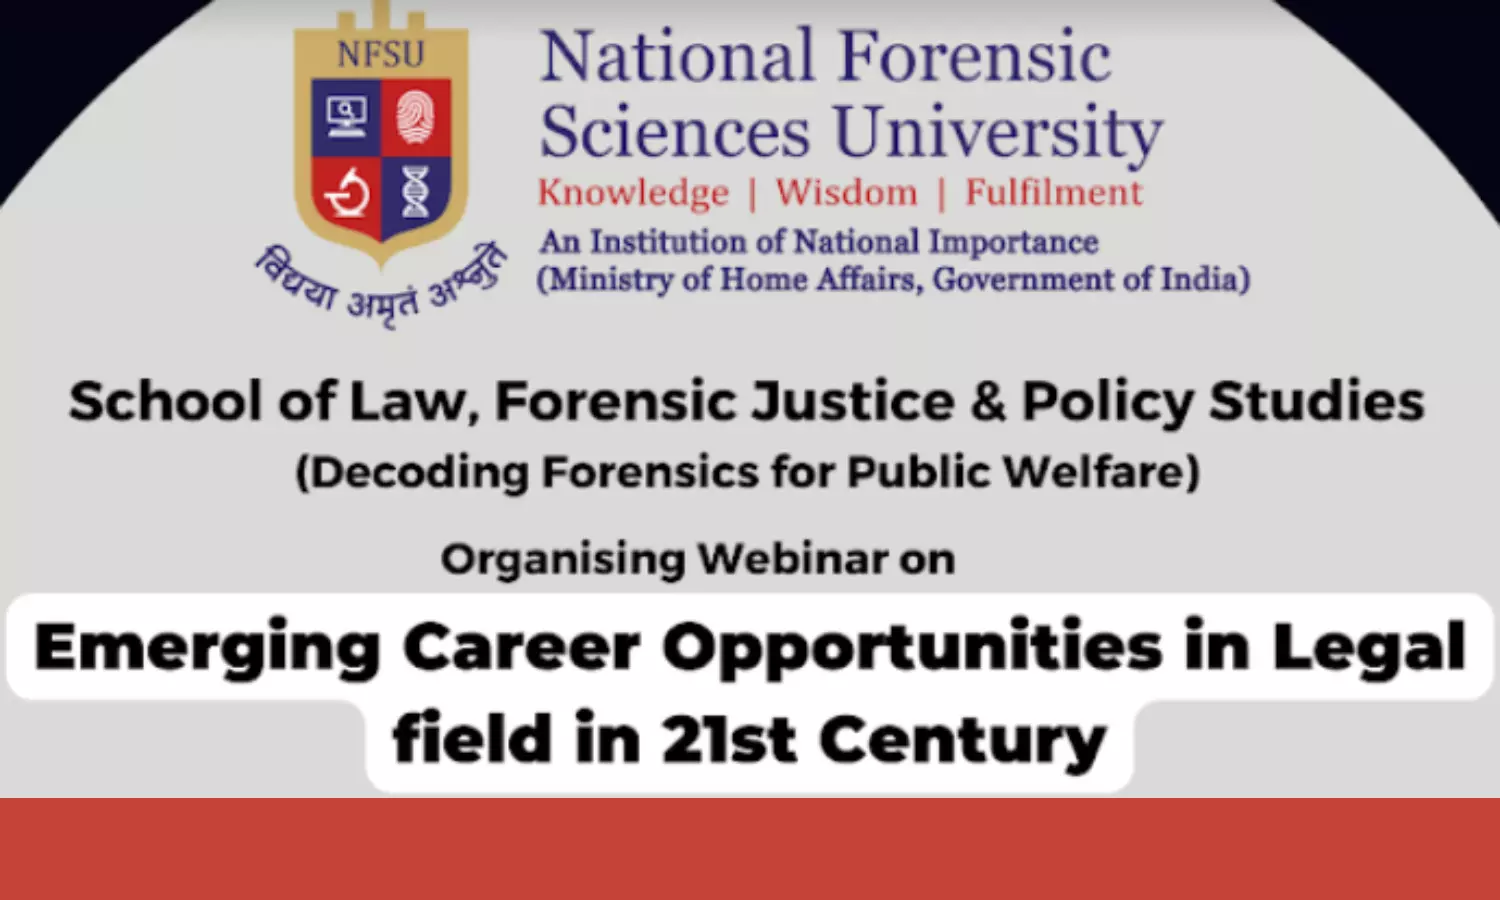 Webinar on Emerging Career Opportunities in Legal Field in 21st Century | National Forensic Sciences University | 06th January, 2023.